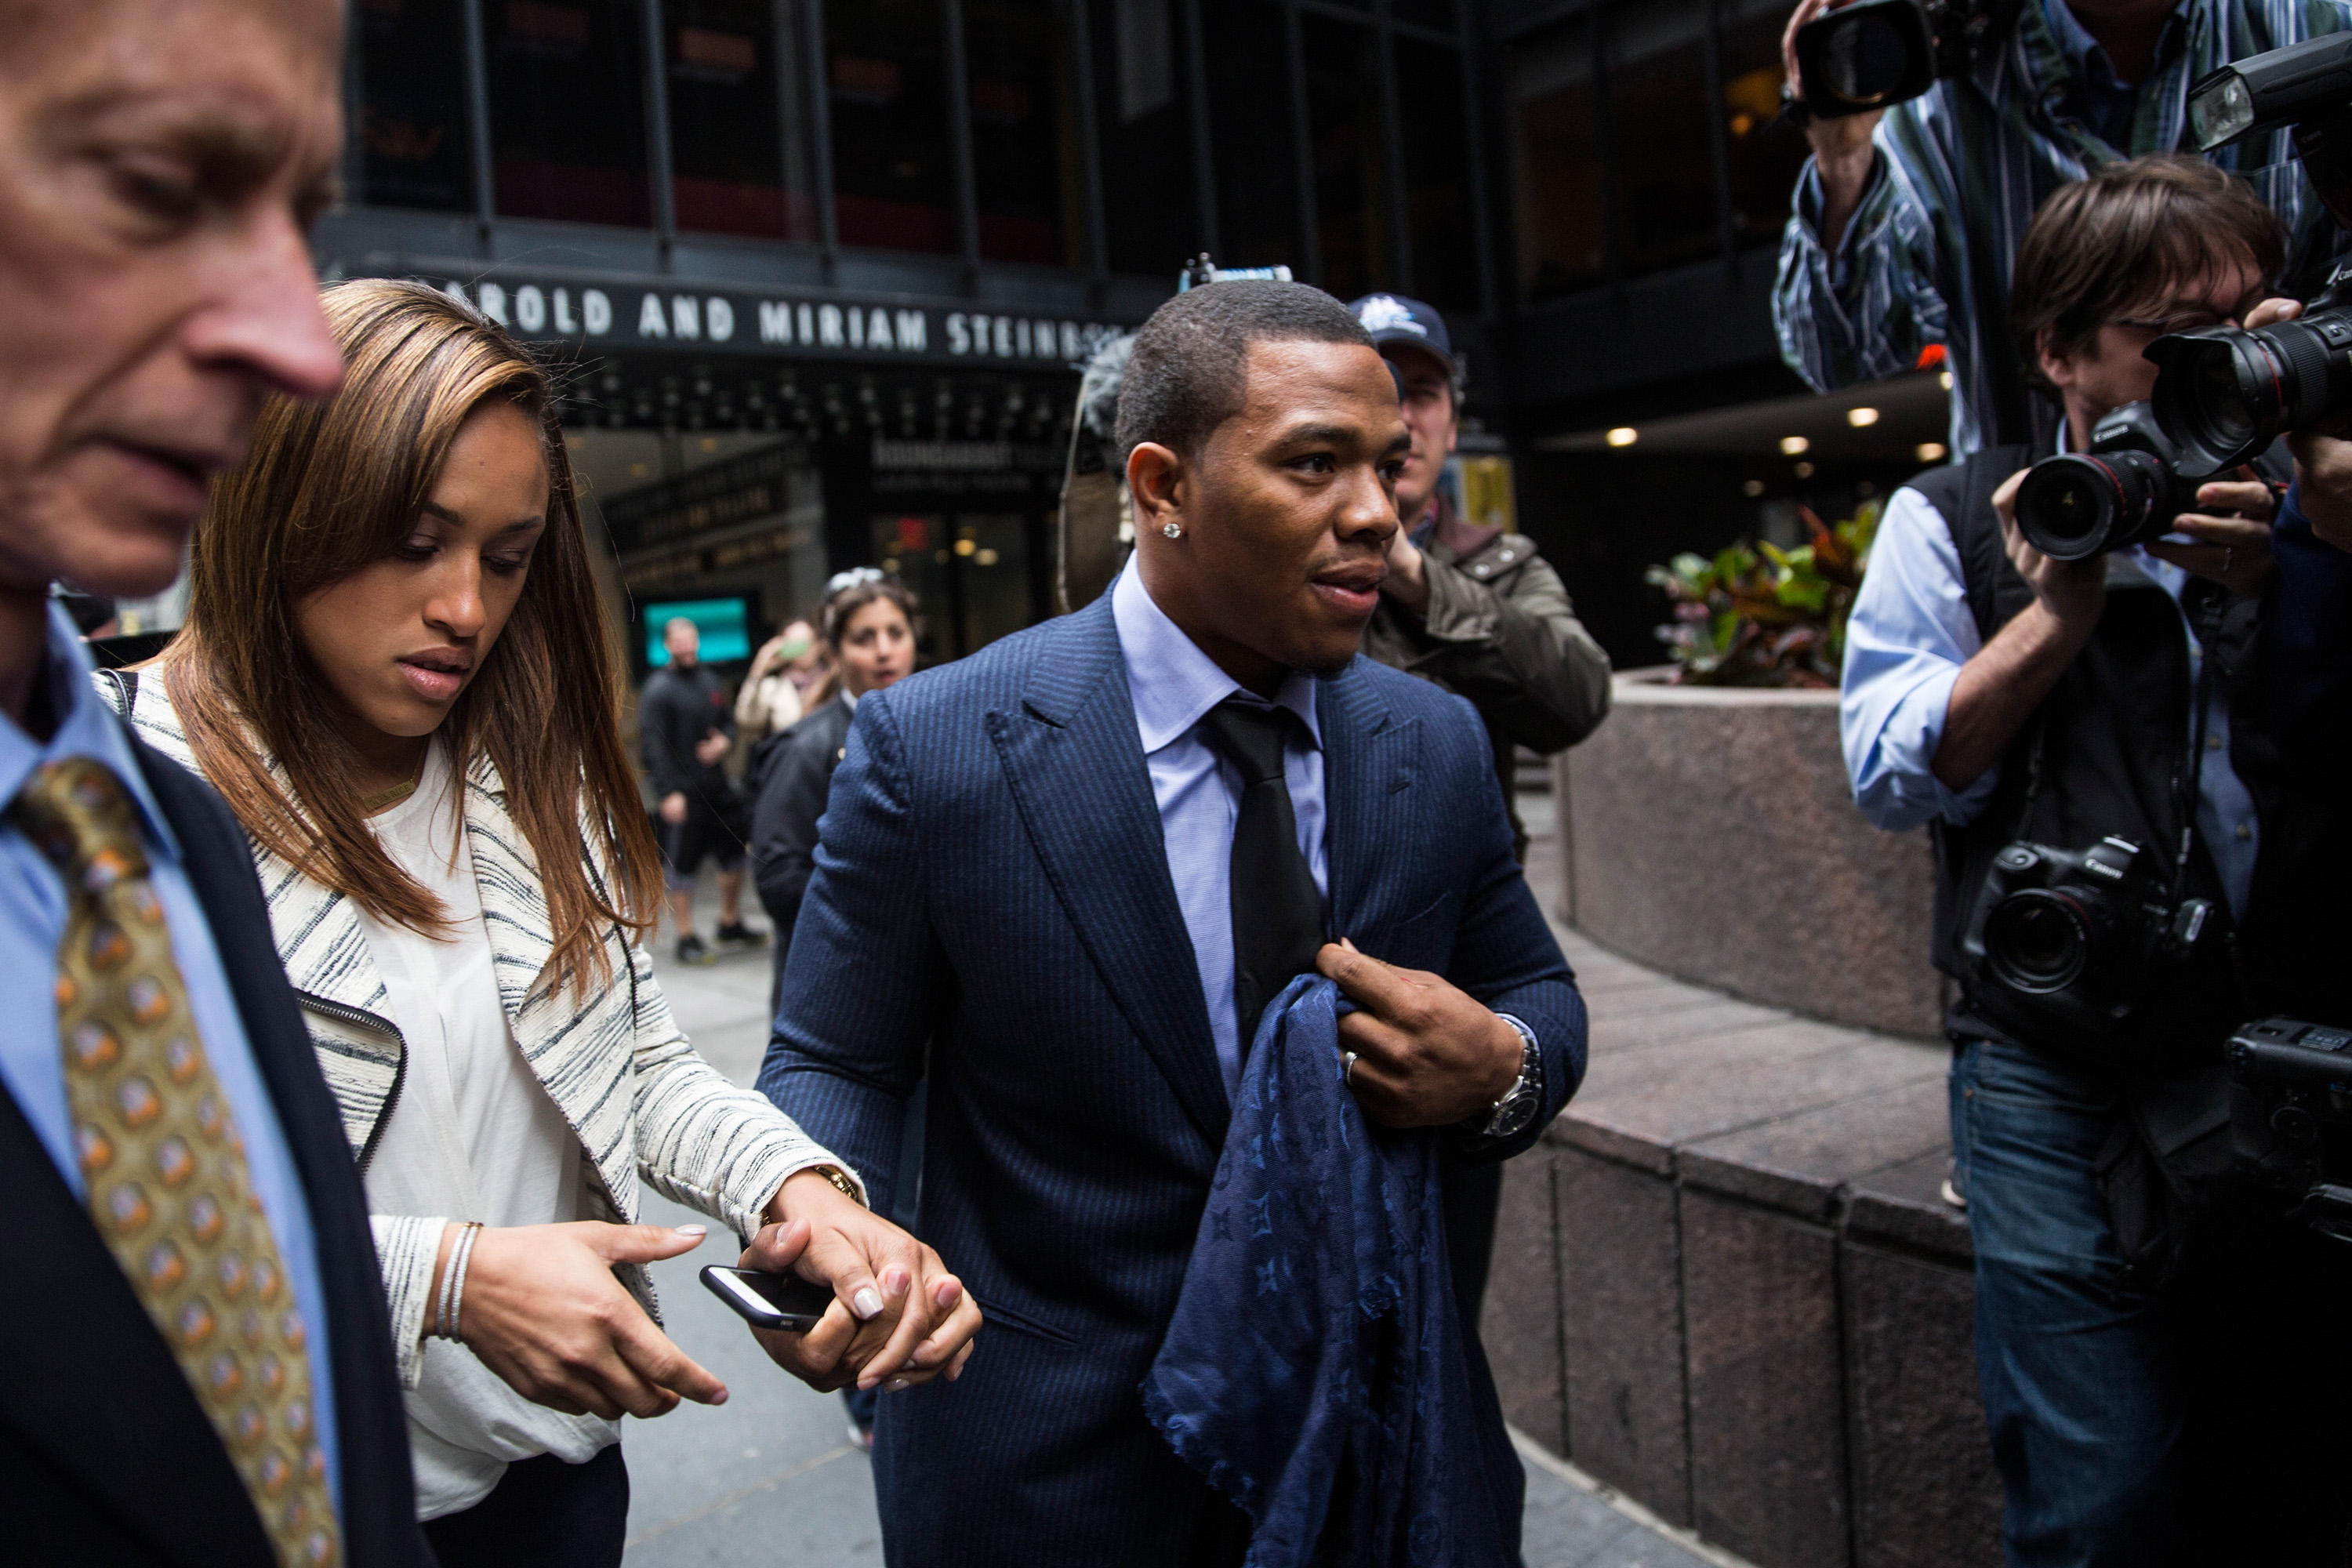 Suspended Baltimore Ravens football player Ray Rice (R) and his wife Janay Palmer arrive for a hearing on November 5, 2014 in New York City. (Andrew Burton&mdash;Getty Images)